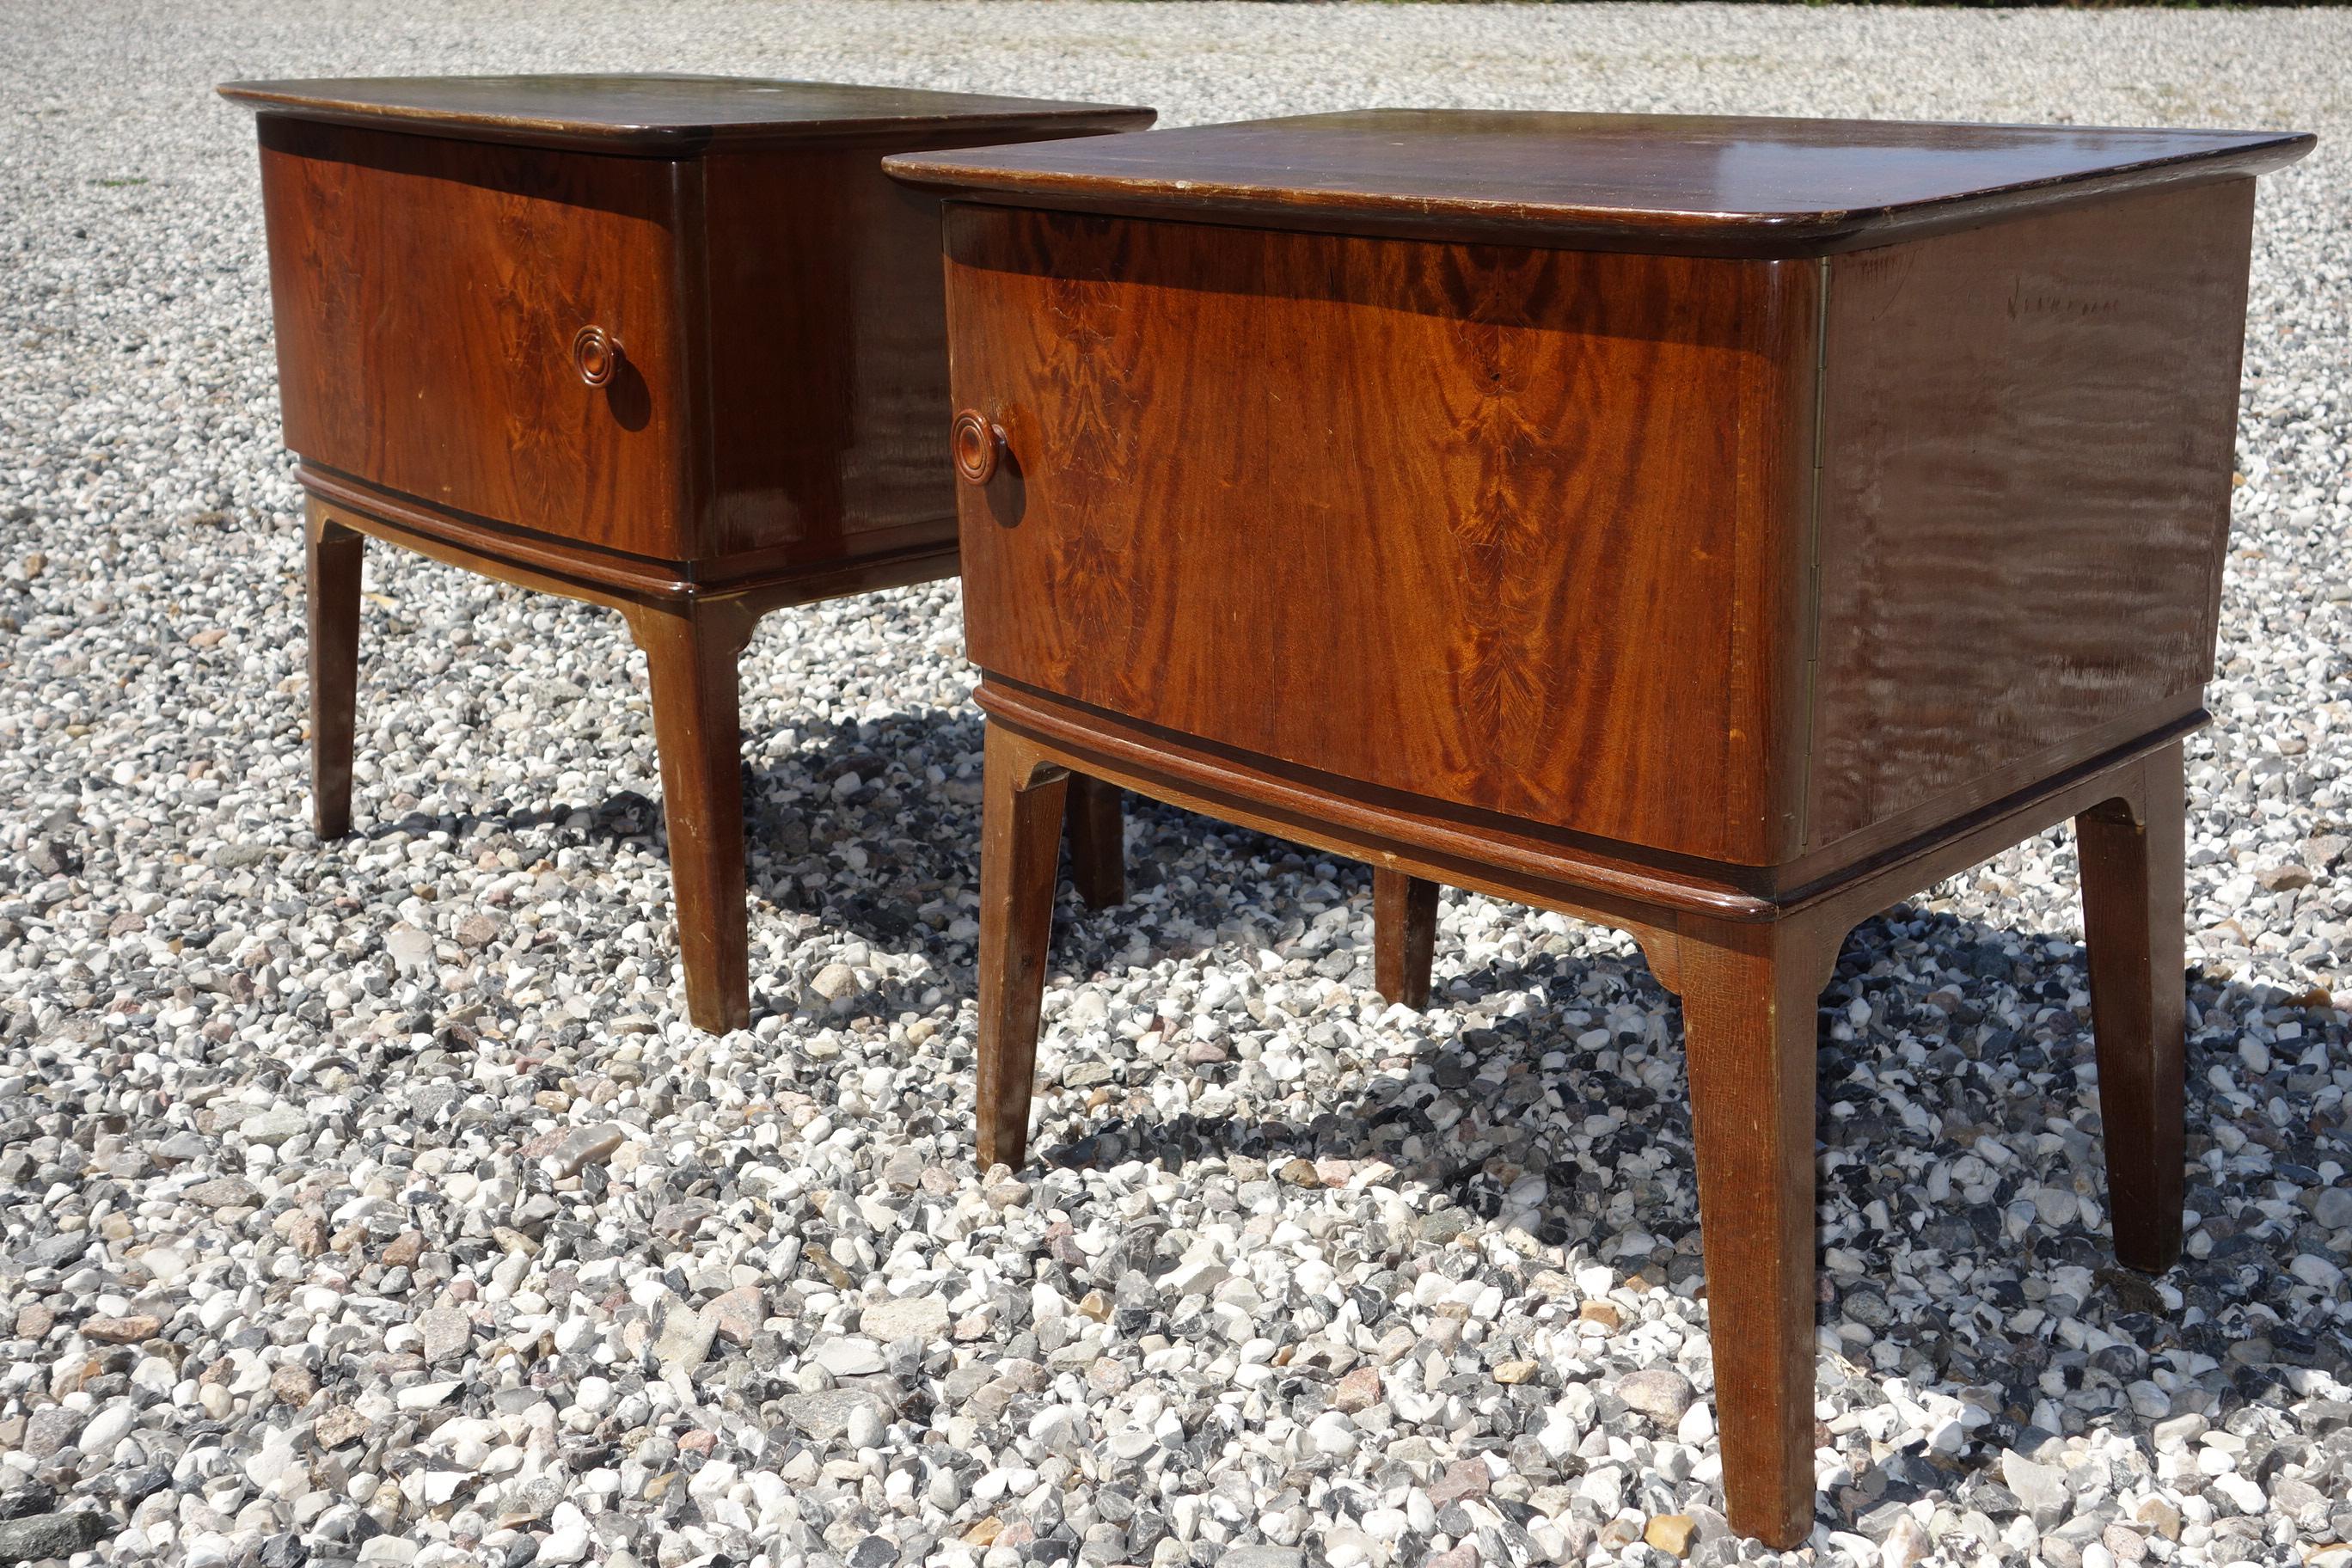 Organic Modern Pair of 1940s-1950s Bedside Tables in Flamed Mahogany Wood For Sale